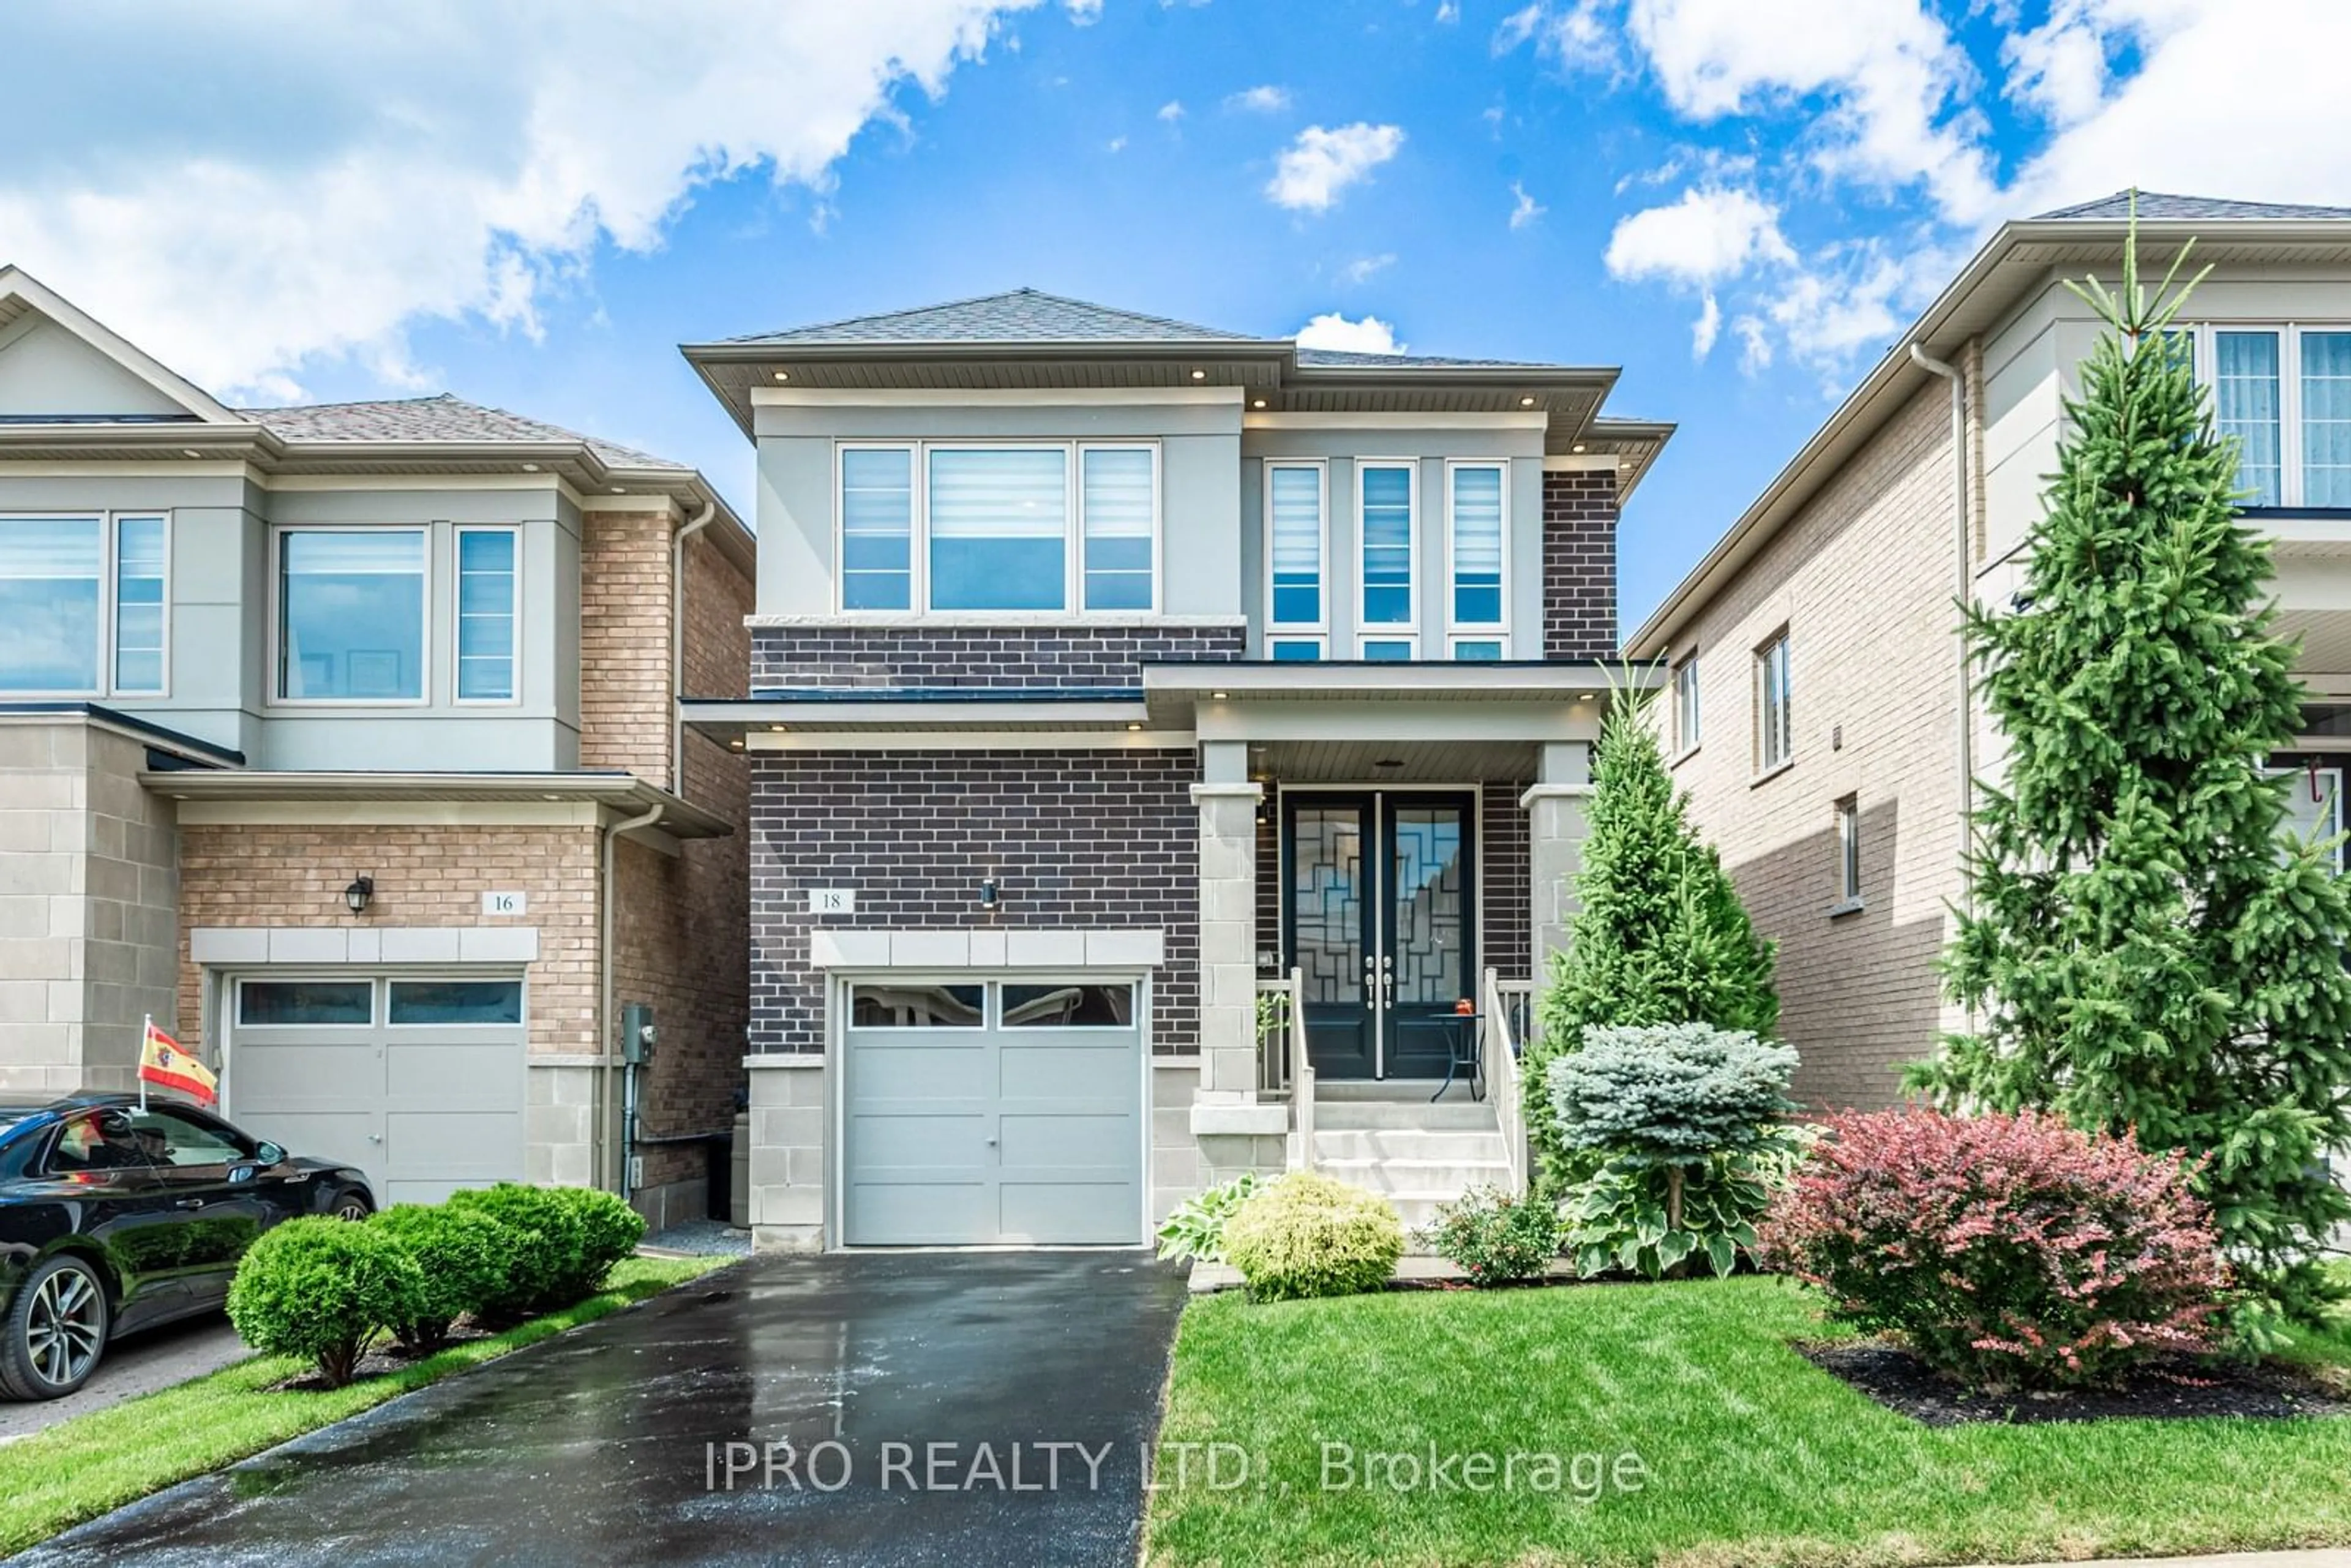 Home with brick exterior material for 18 Falconridge Terr, East Gwillimbury Ontario L9N 0R2